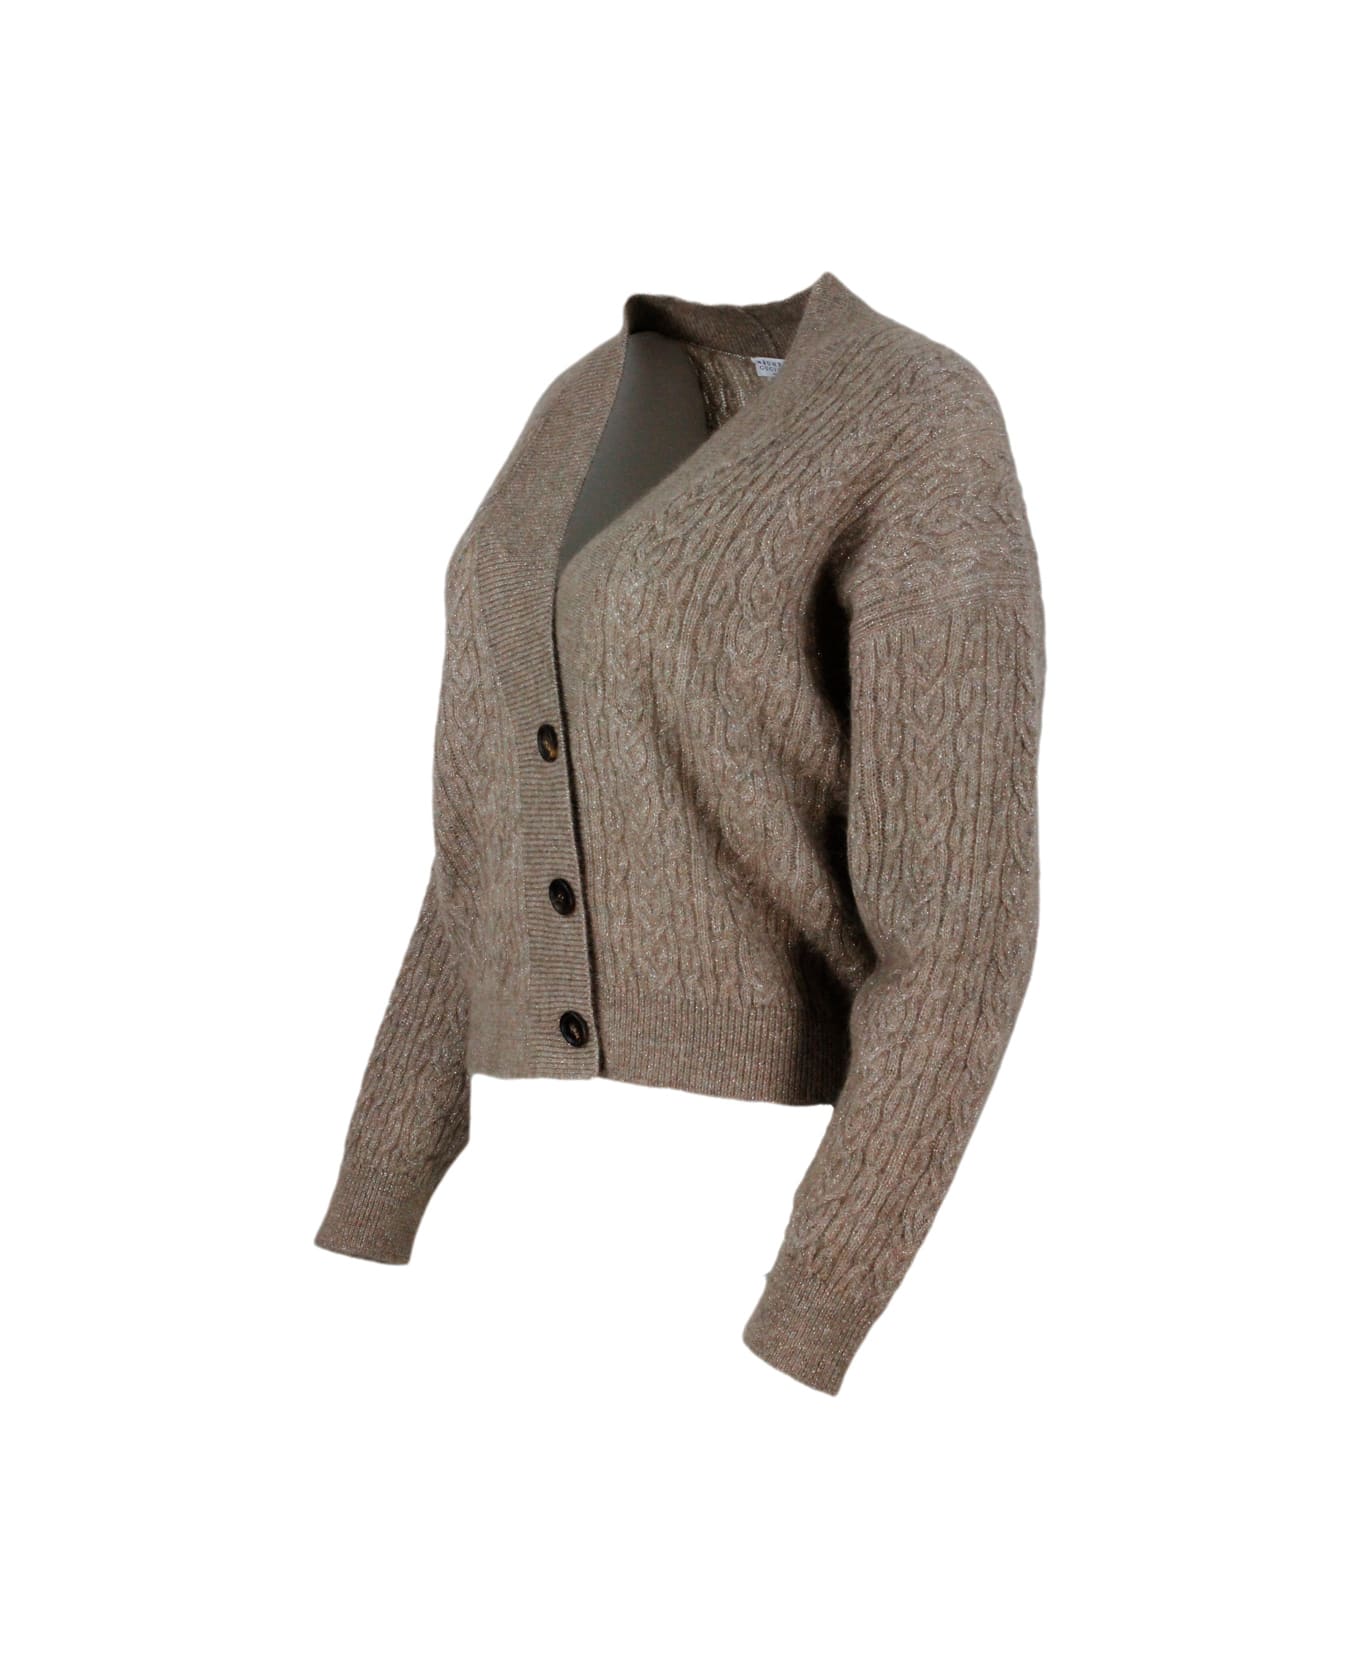 Brunello Cucinelli Cable Knit Wool Blend Cardigan Sweater - Brown カーディガン